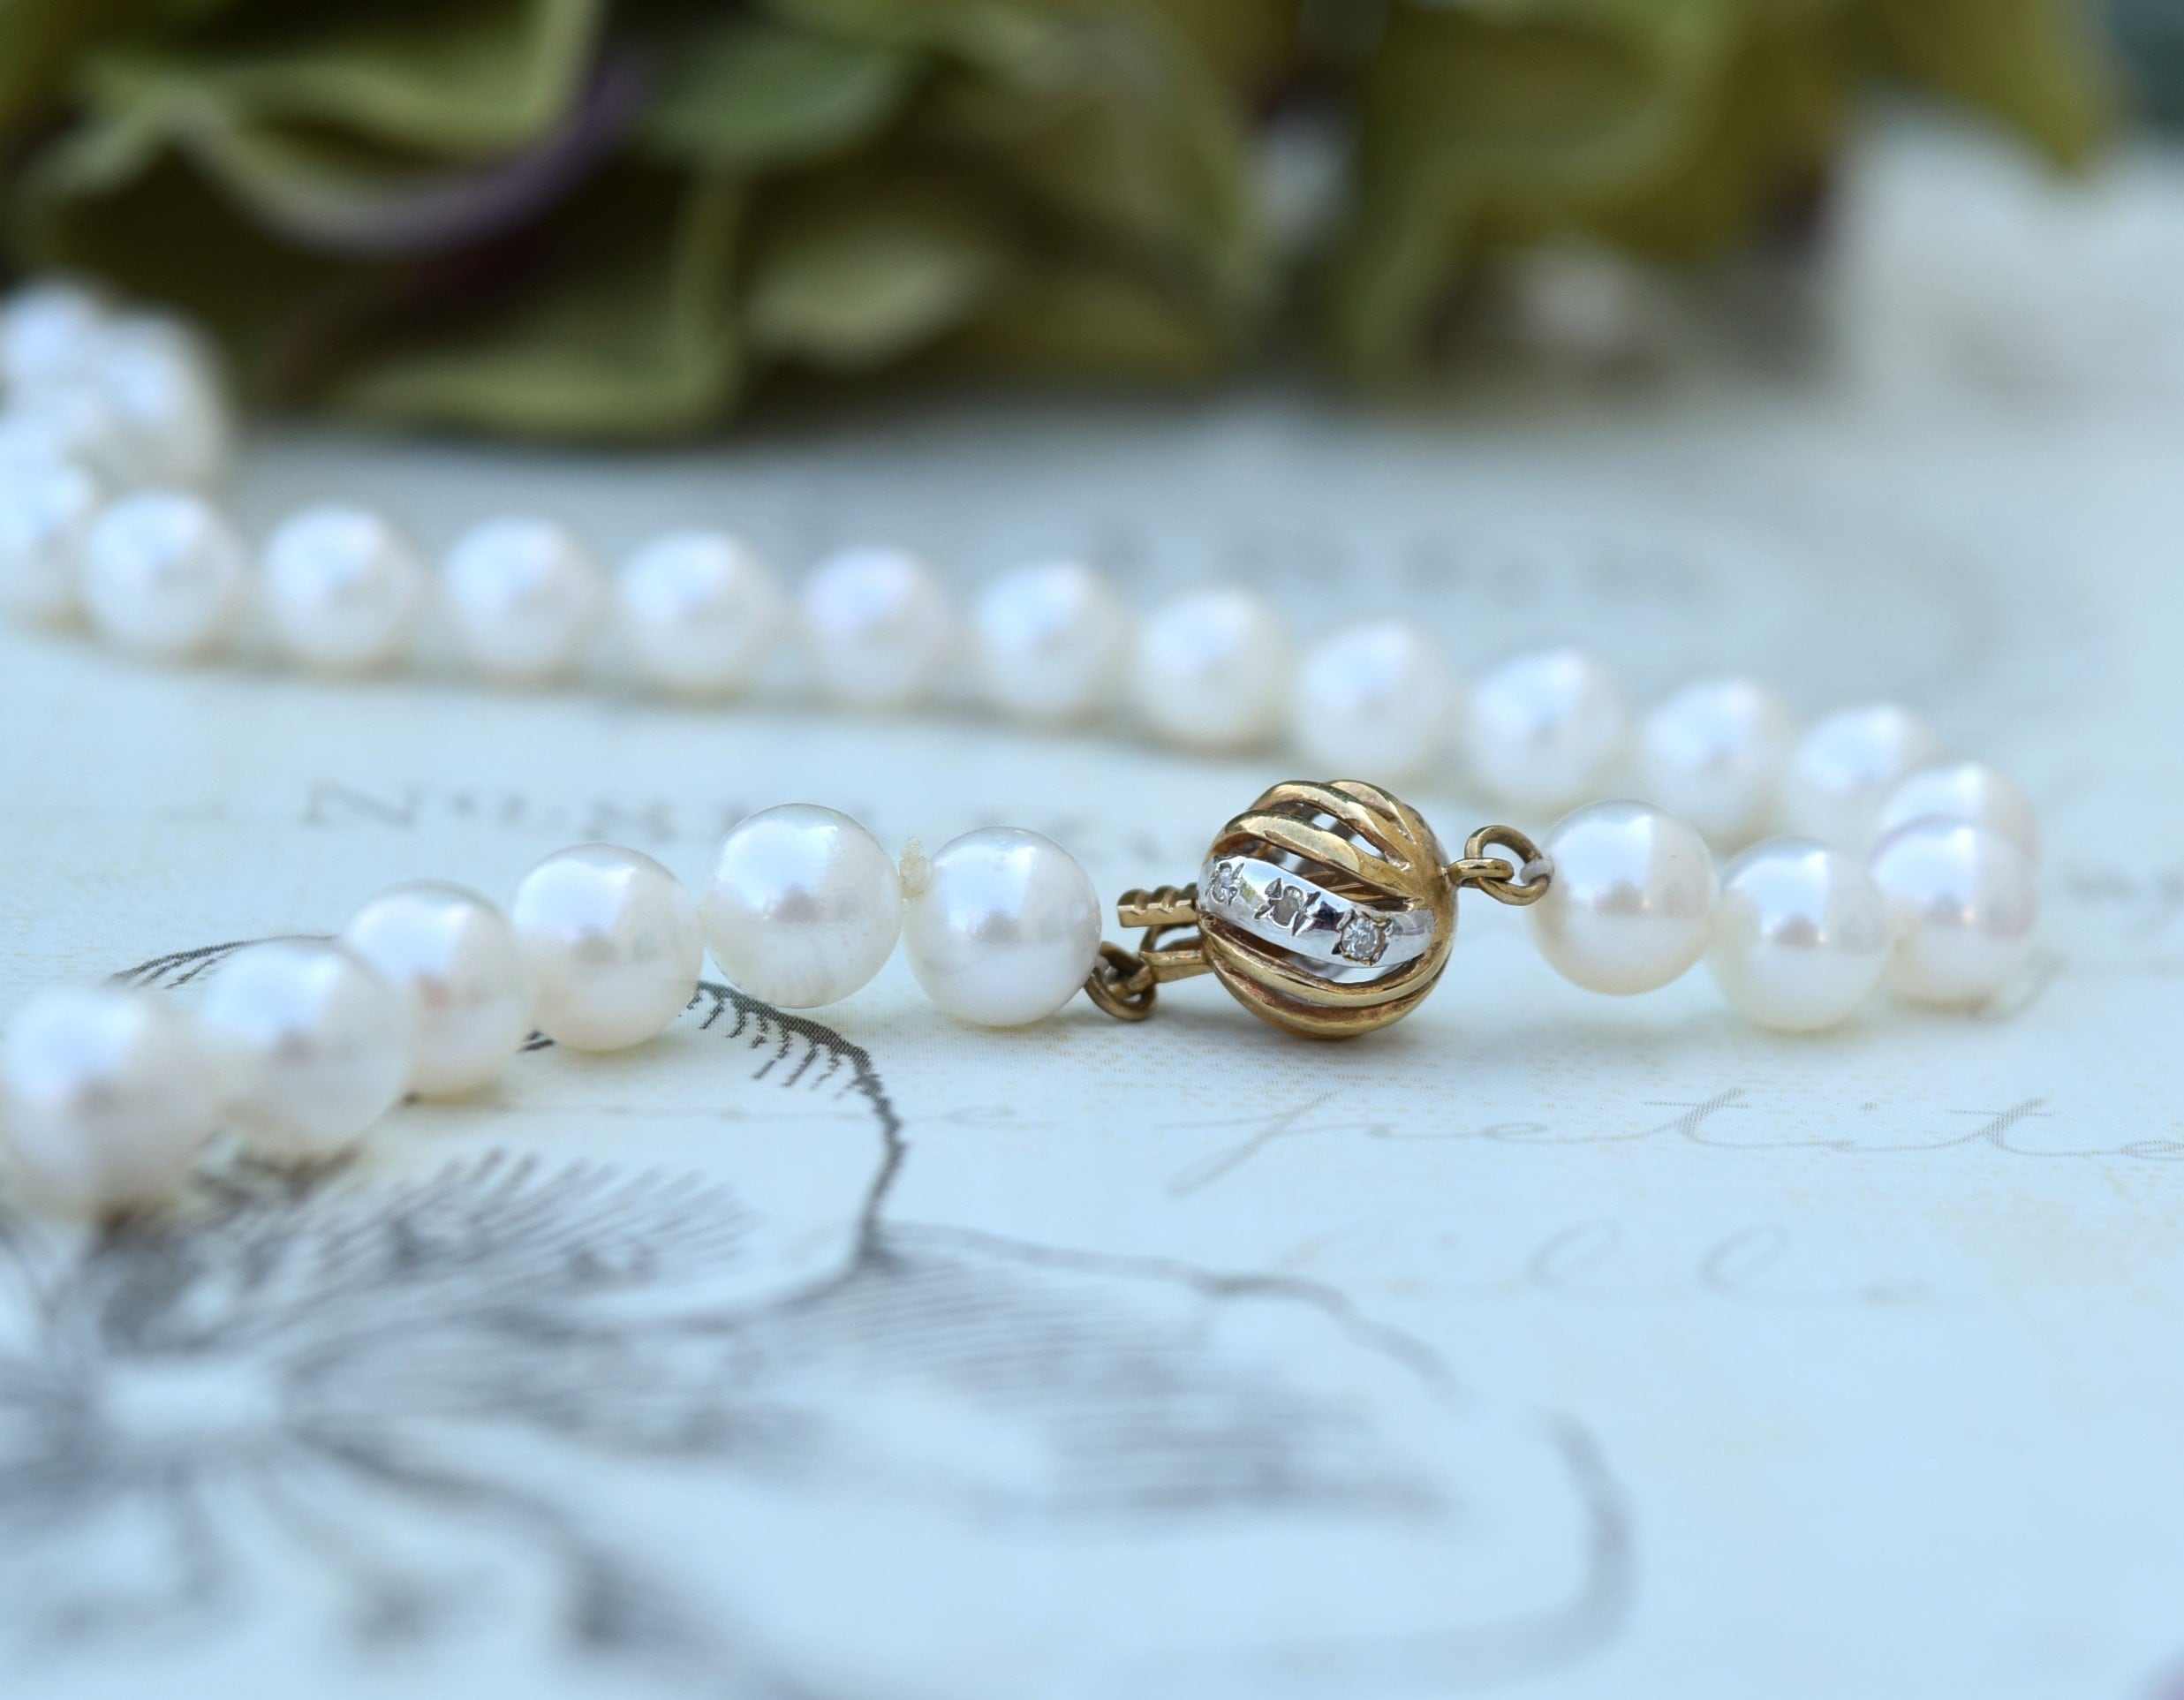 PEARL NECKLACE, cultured saltwater pearls, clasp in 18K gold. Jewellery &  Gemstones - Necklace - Auctionet